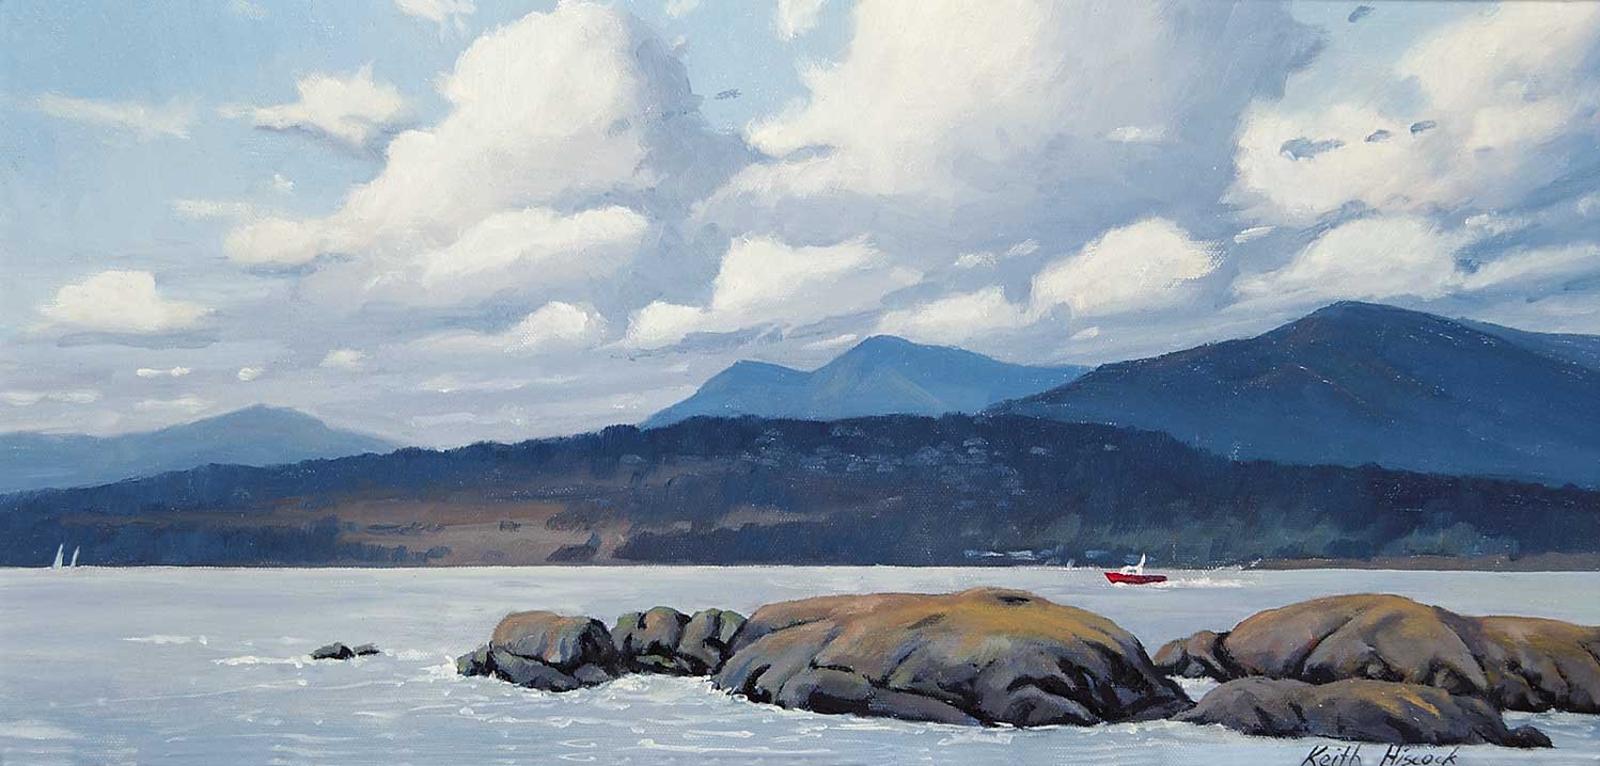 Keith Hiscock (1951) - Pilot Boat, Holland Point Looking Towards Metchosin